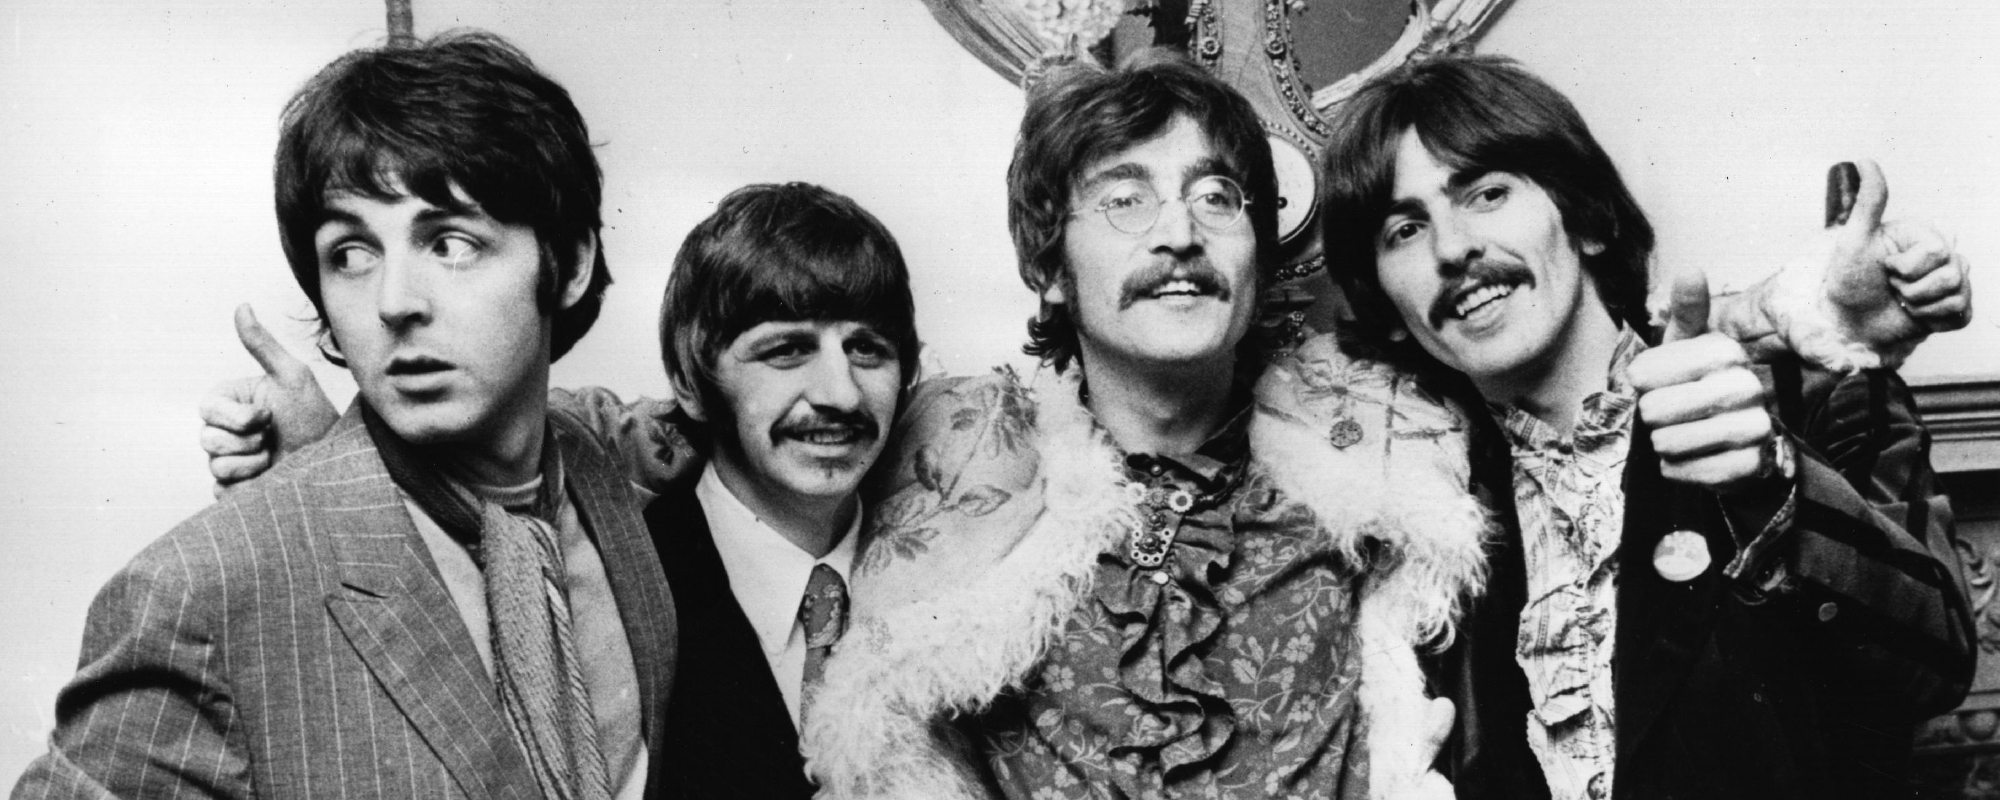 On This Day in Music History: The Beatles Make Their ‘Ed Sullivan Show’ Debut